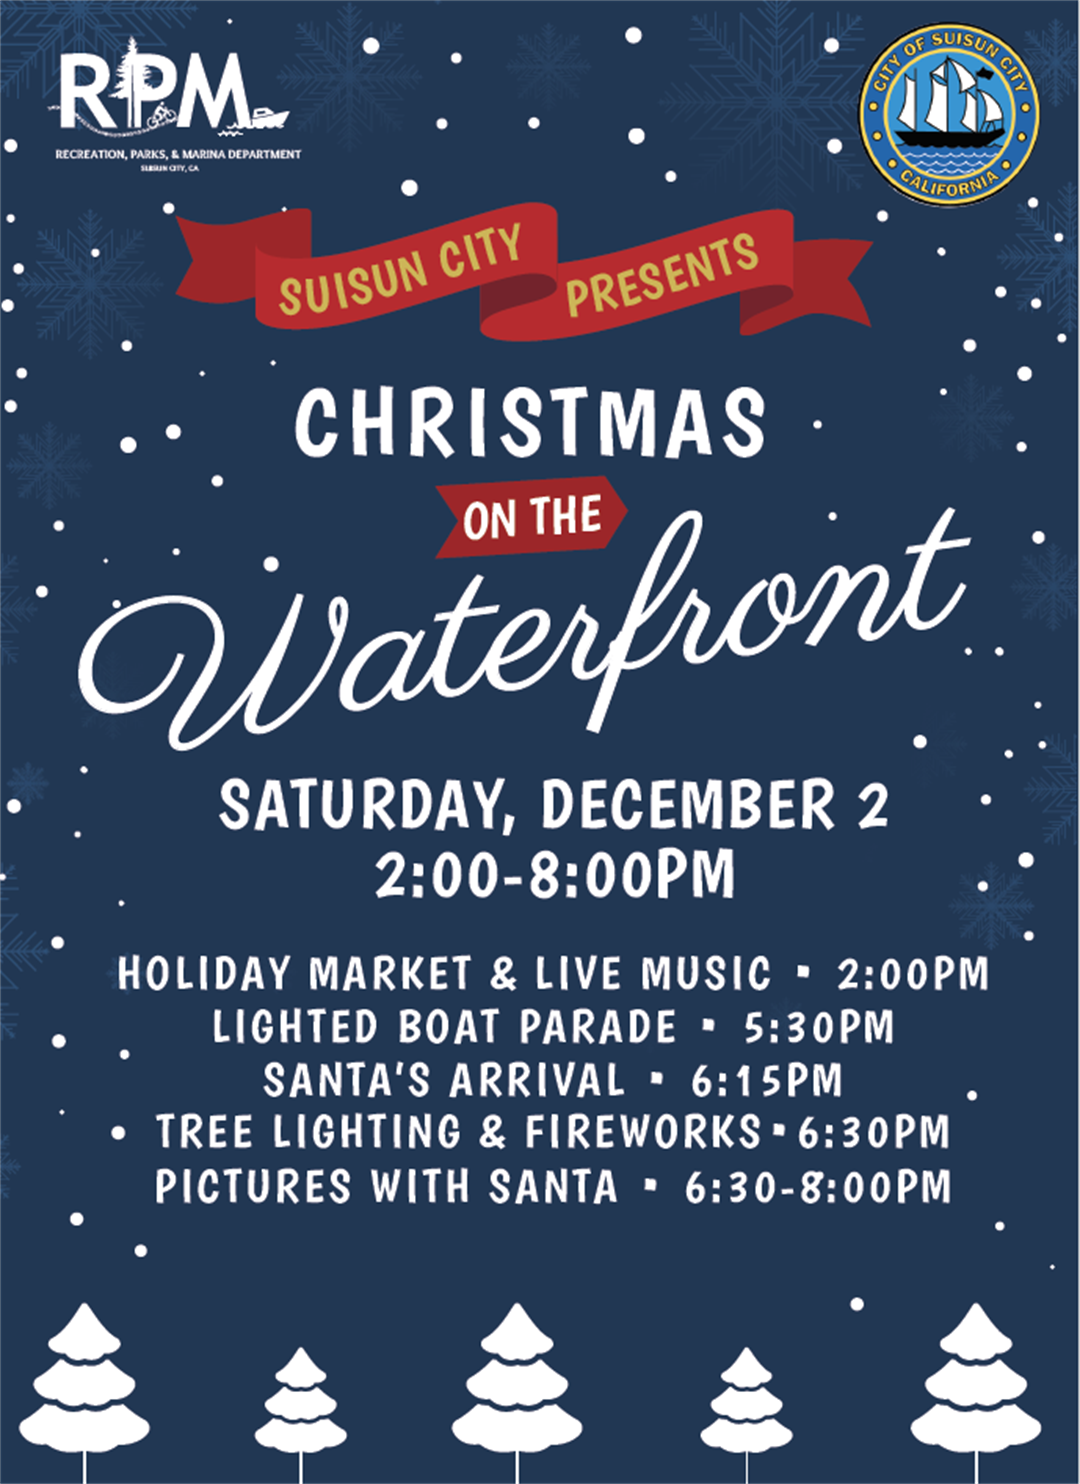 Christmas on the Waterfront Suisun City, CA